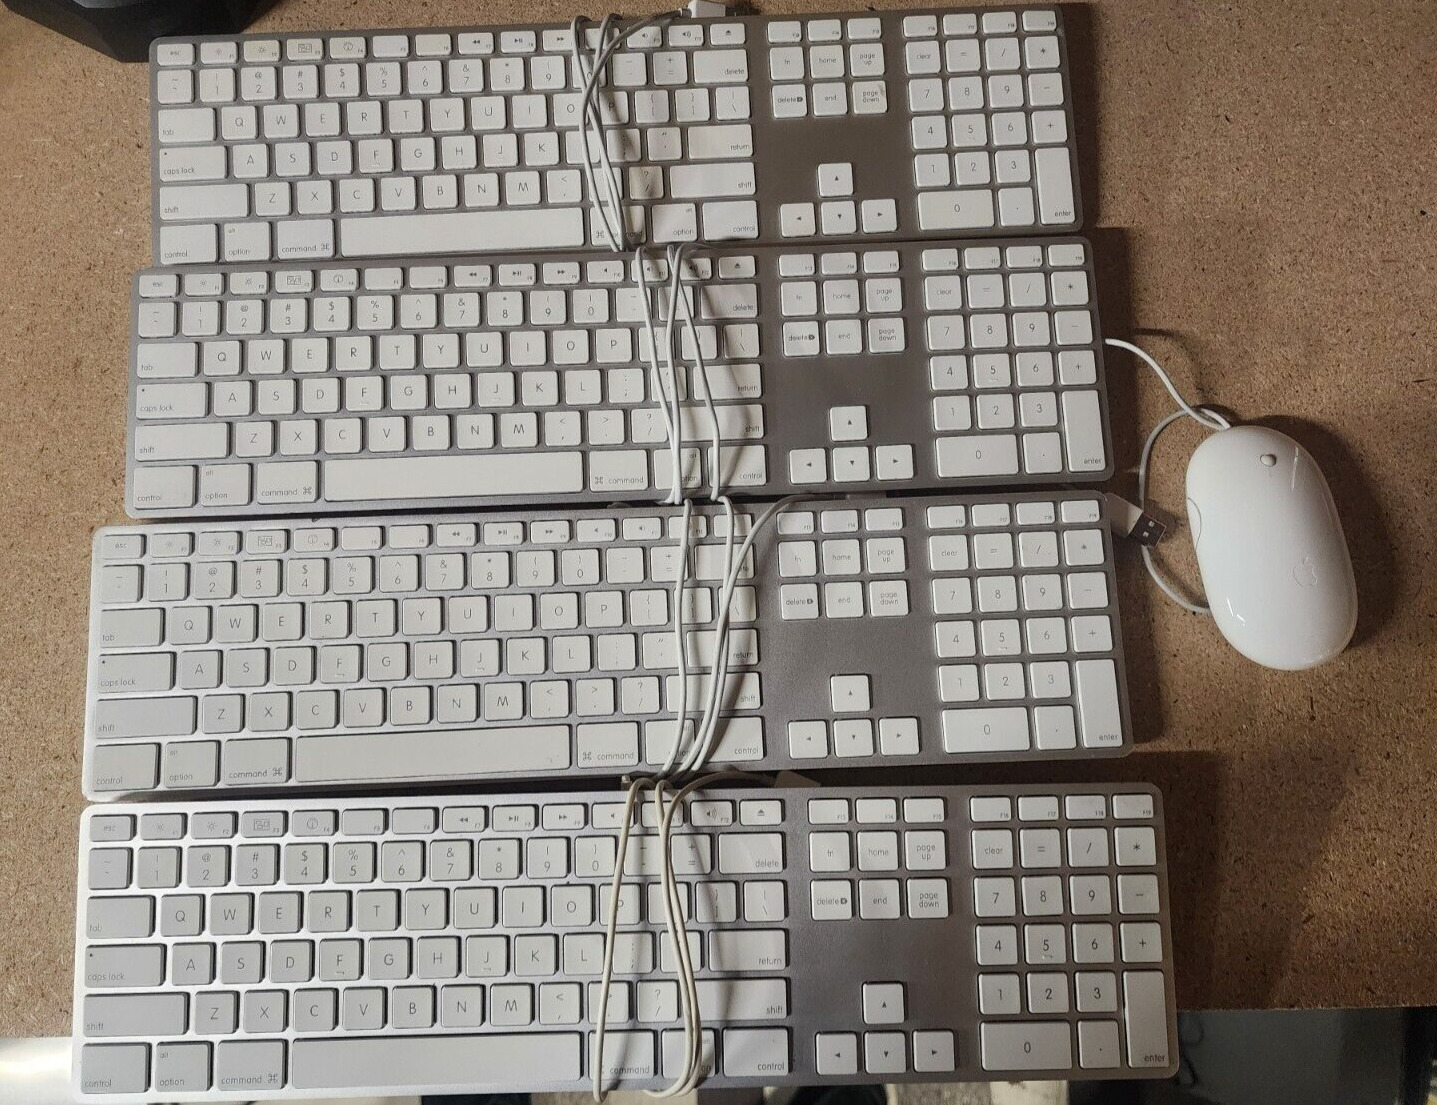 Lot of 4 x Apple White Aluminum USB Wired Keyboard A1243 and 1x Mouse A1152